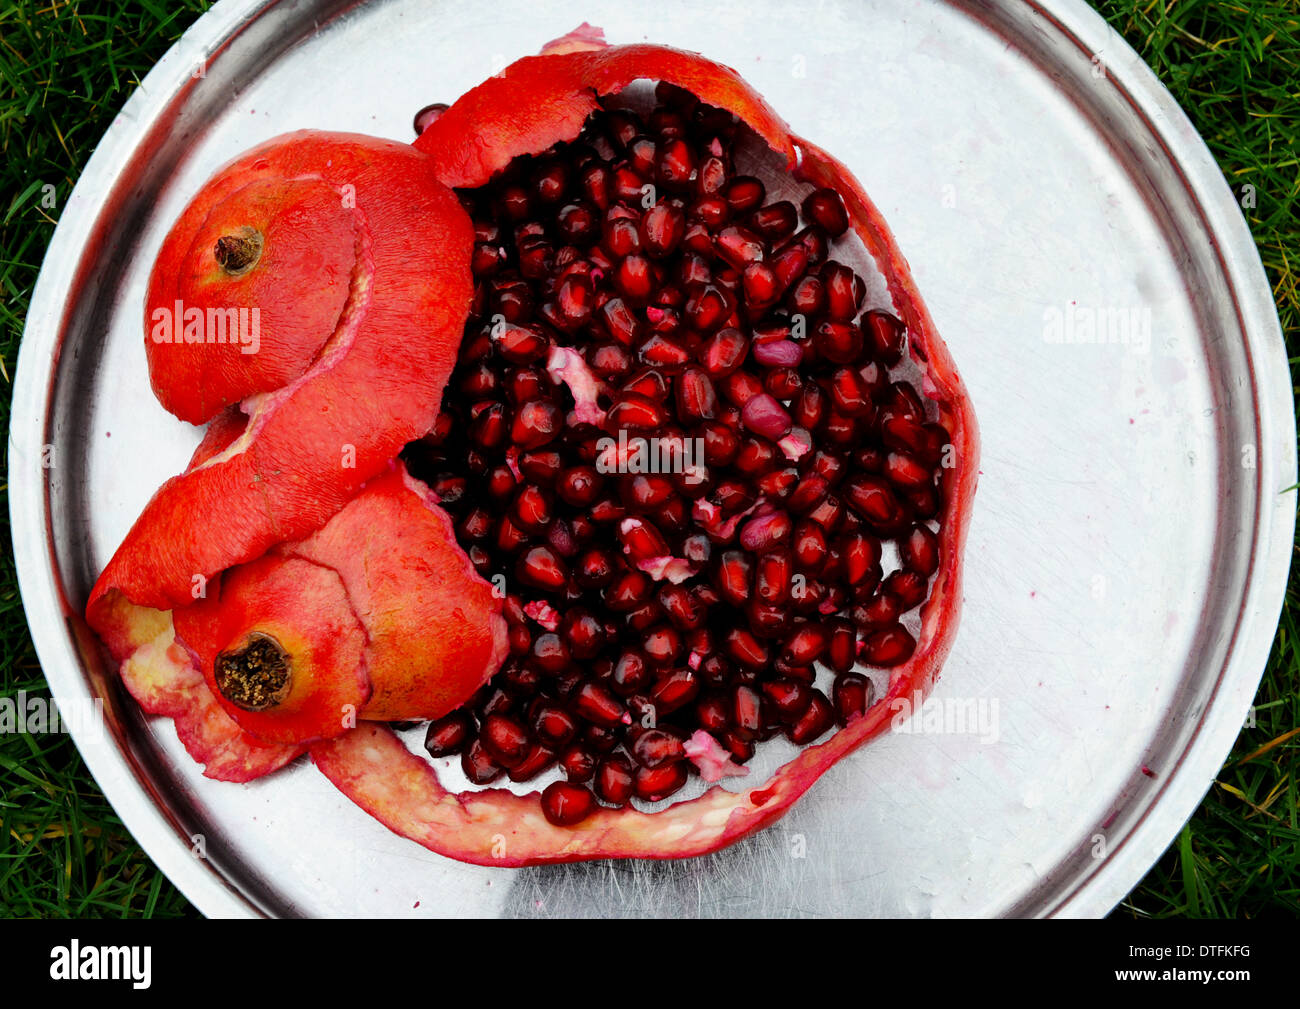 Ruby red pomegranate fruit in peeled skin showing rich deep red seeds covered with juicy sweet pulp. Stock Photo